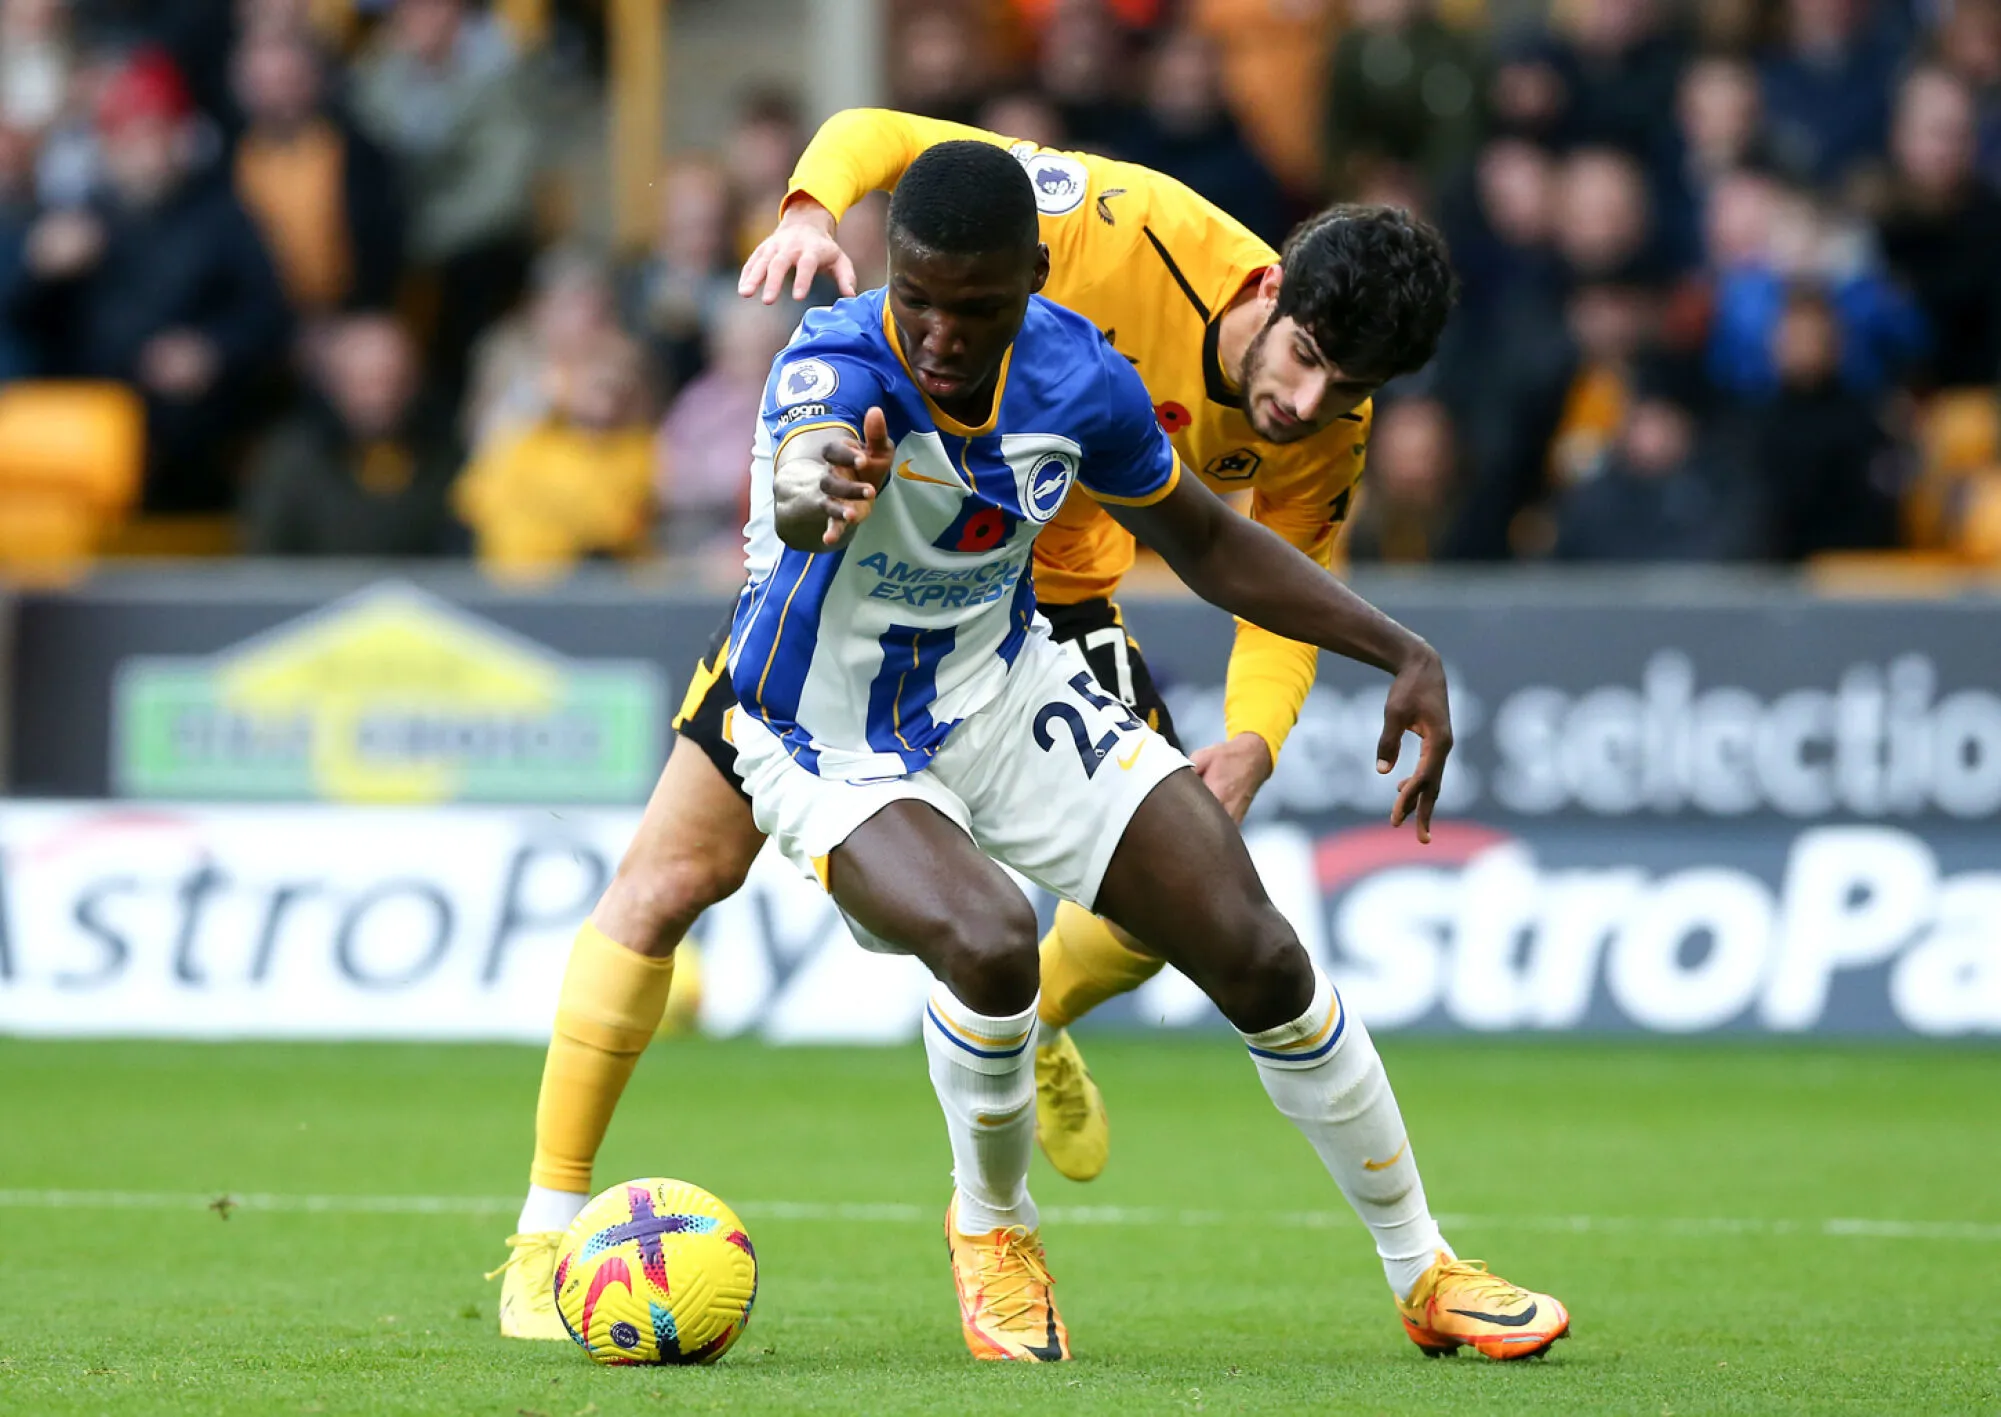 Brighton and Hove Albion's Moises Caicedo (left) and Wolverhampton Wanderers's Manuel Goncalo Guedes battle for the ball during the Premier League match at Molineux, Wolverhampton. Picture date: Saturday November 5, 2022. - Photo by Icon sport